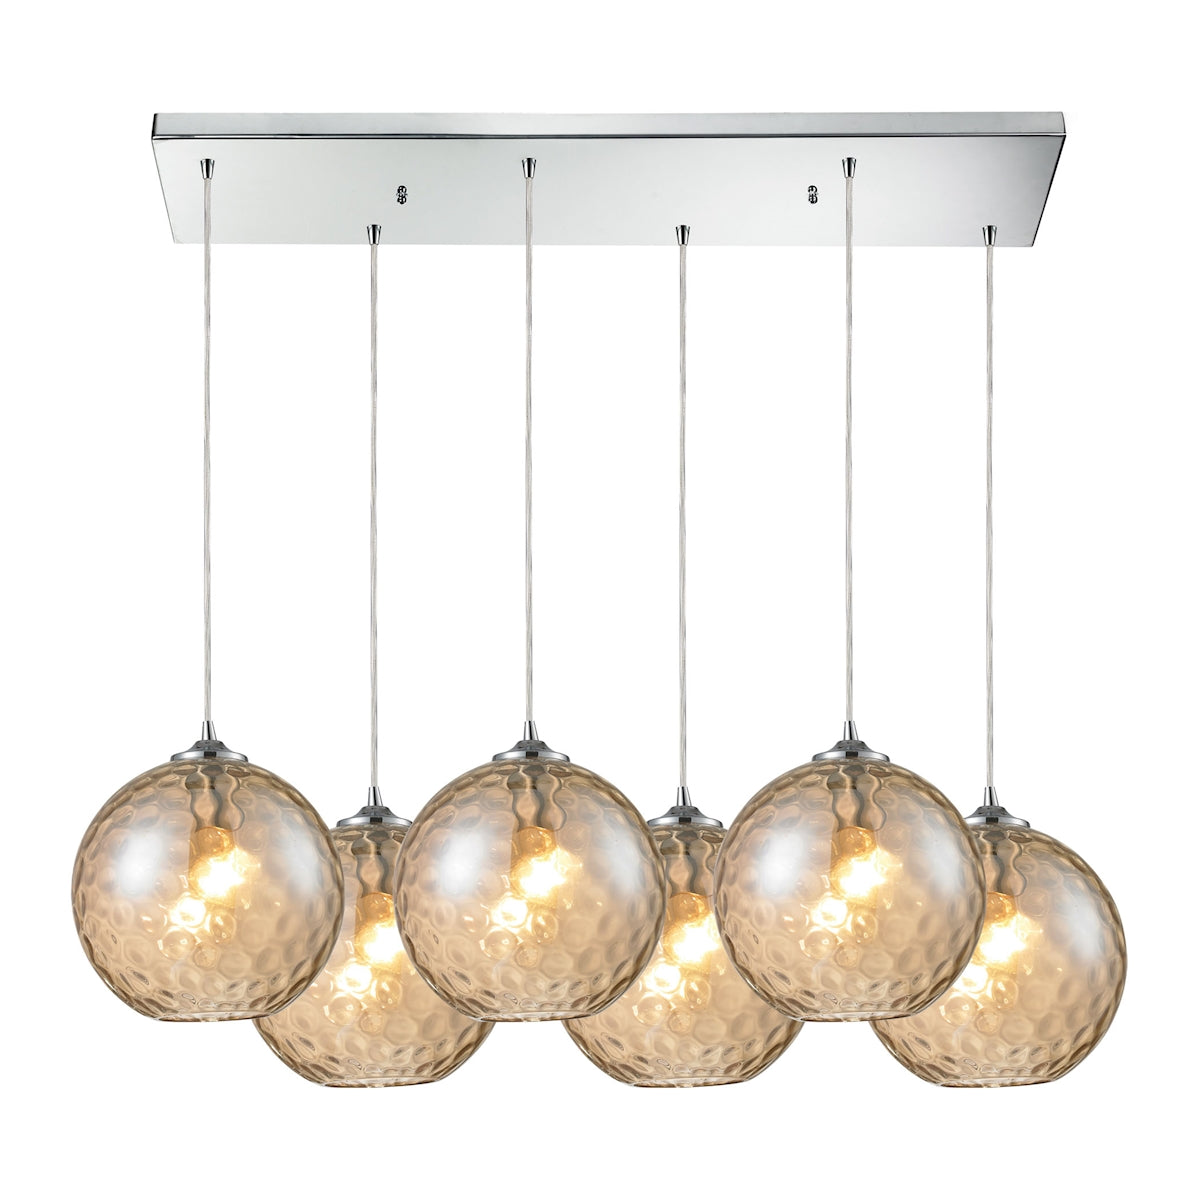 ELK Lighting 31380/6RC-CMP Watersphere 6-Light Rectangular Pendant Fixture in Chrome with Hammered Amber Glass